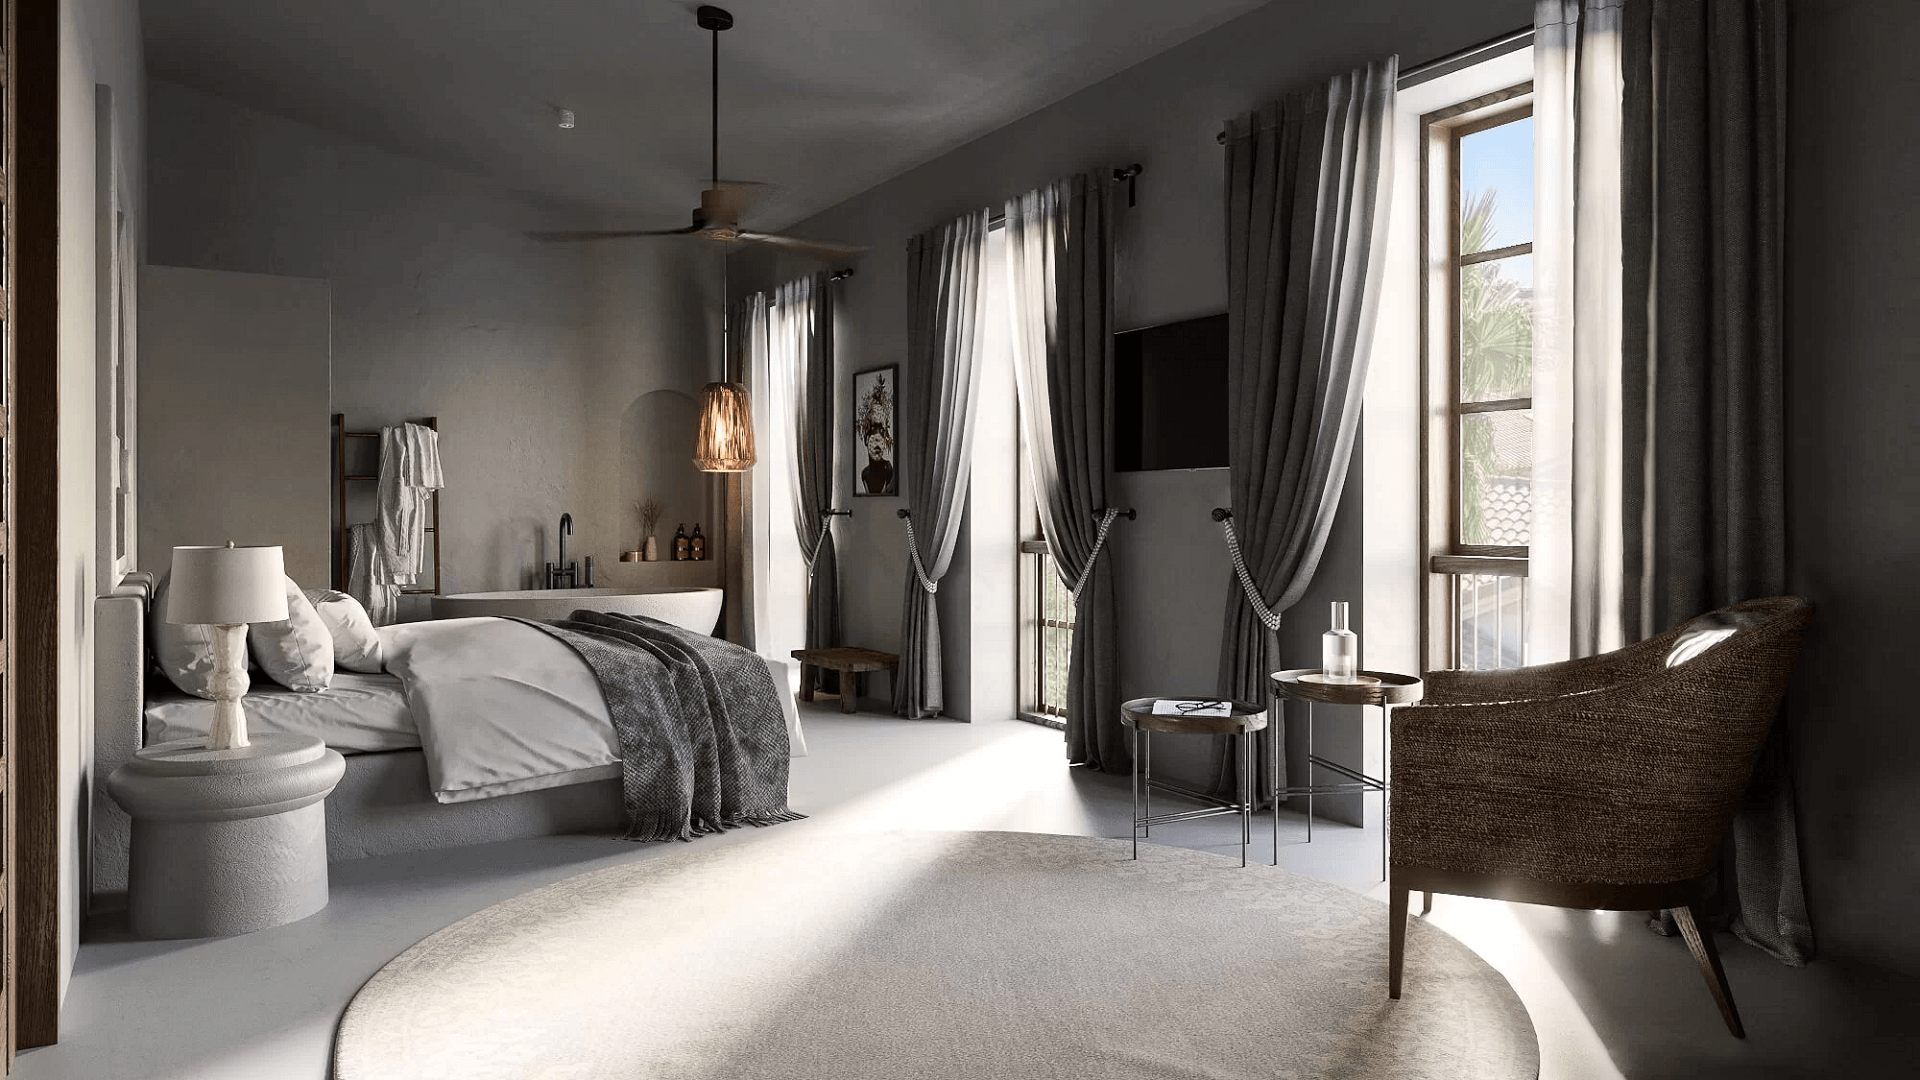 3D Architectural Visualization of a Hotel Room Design